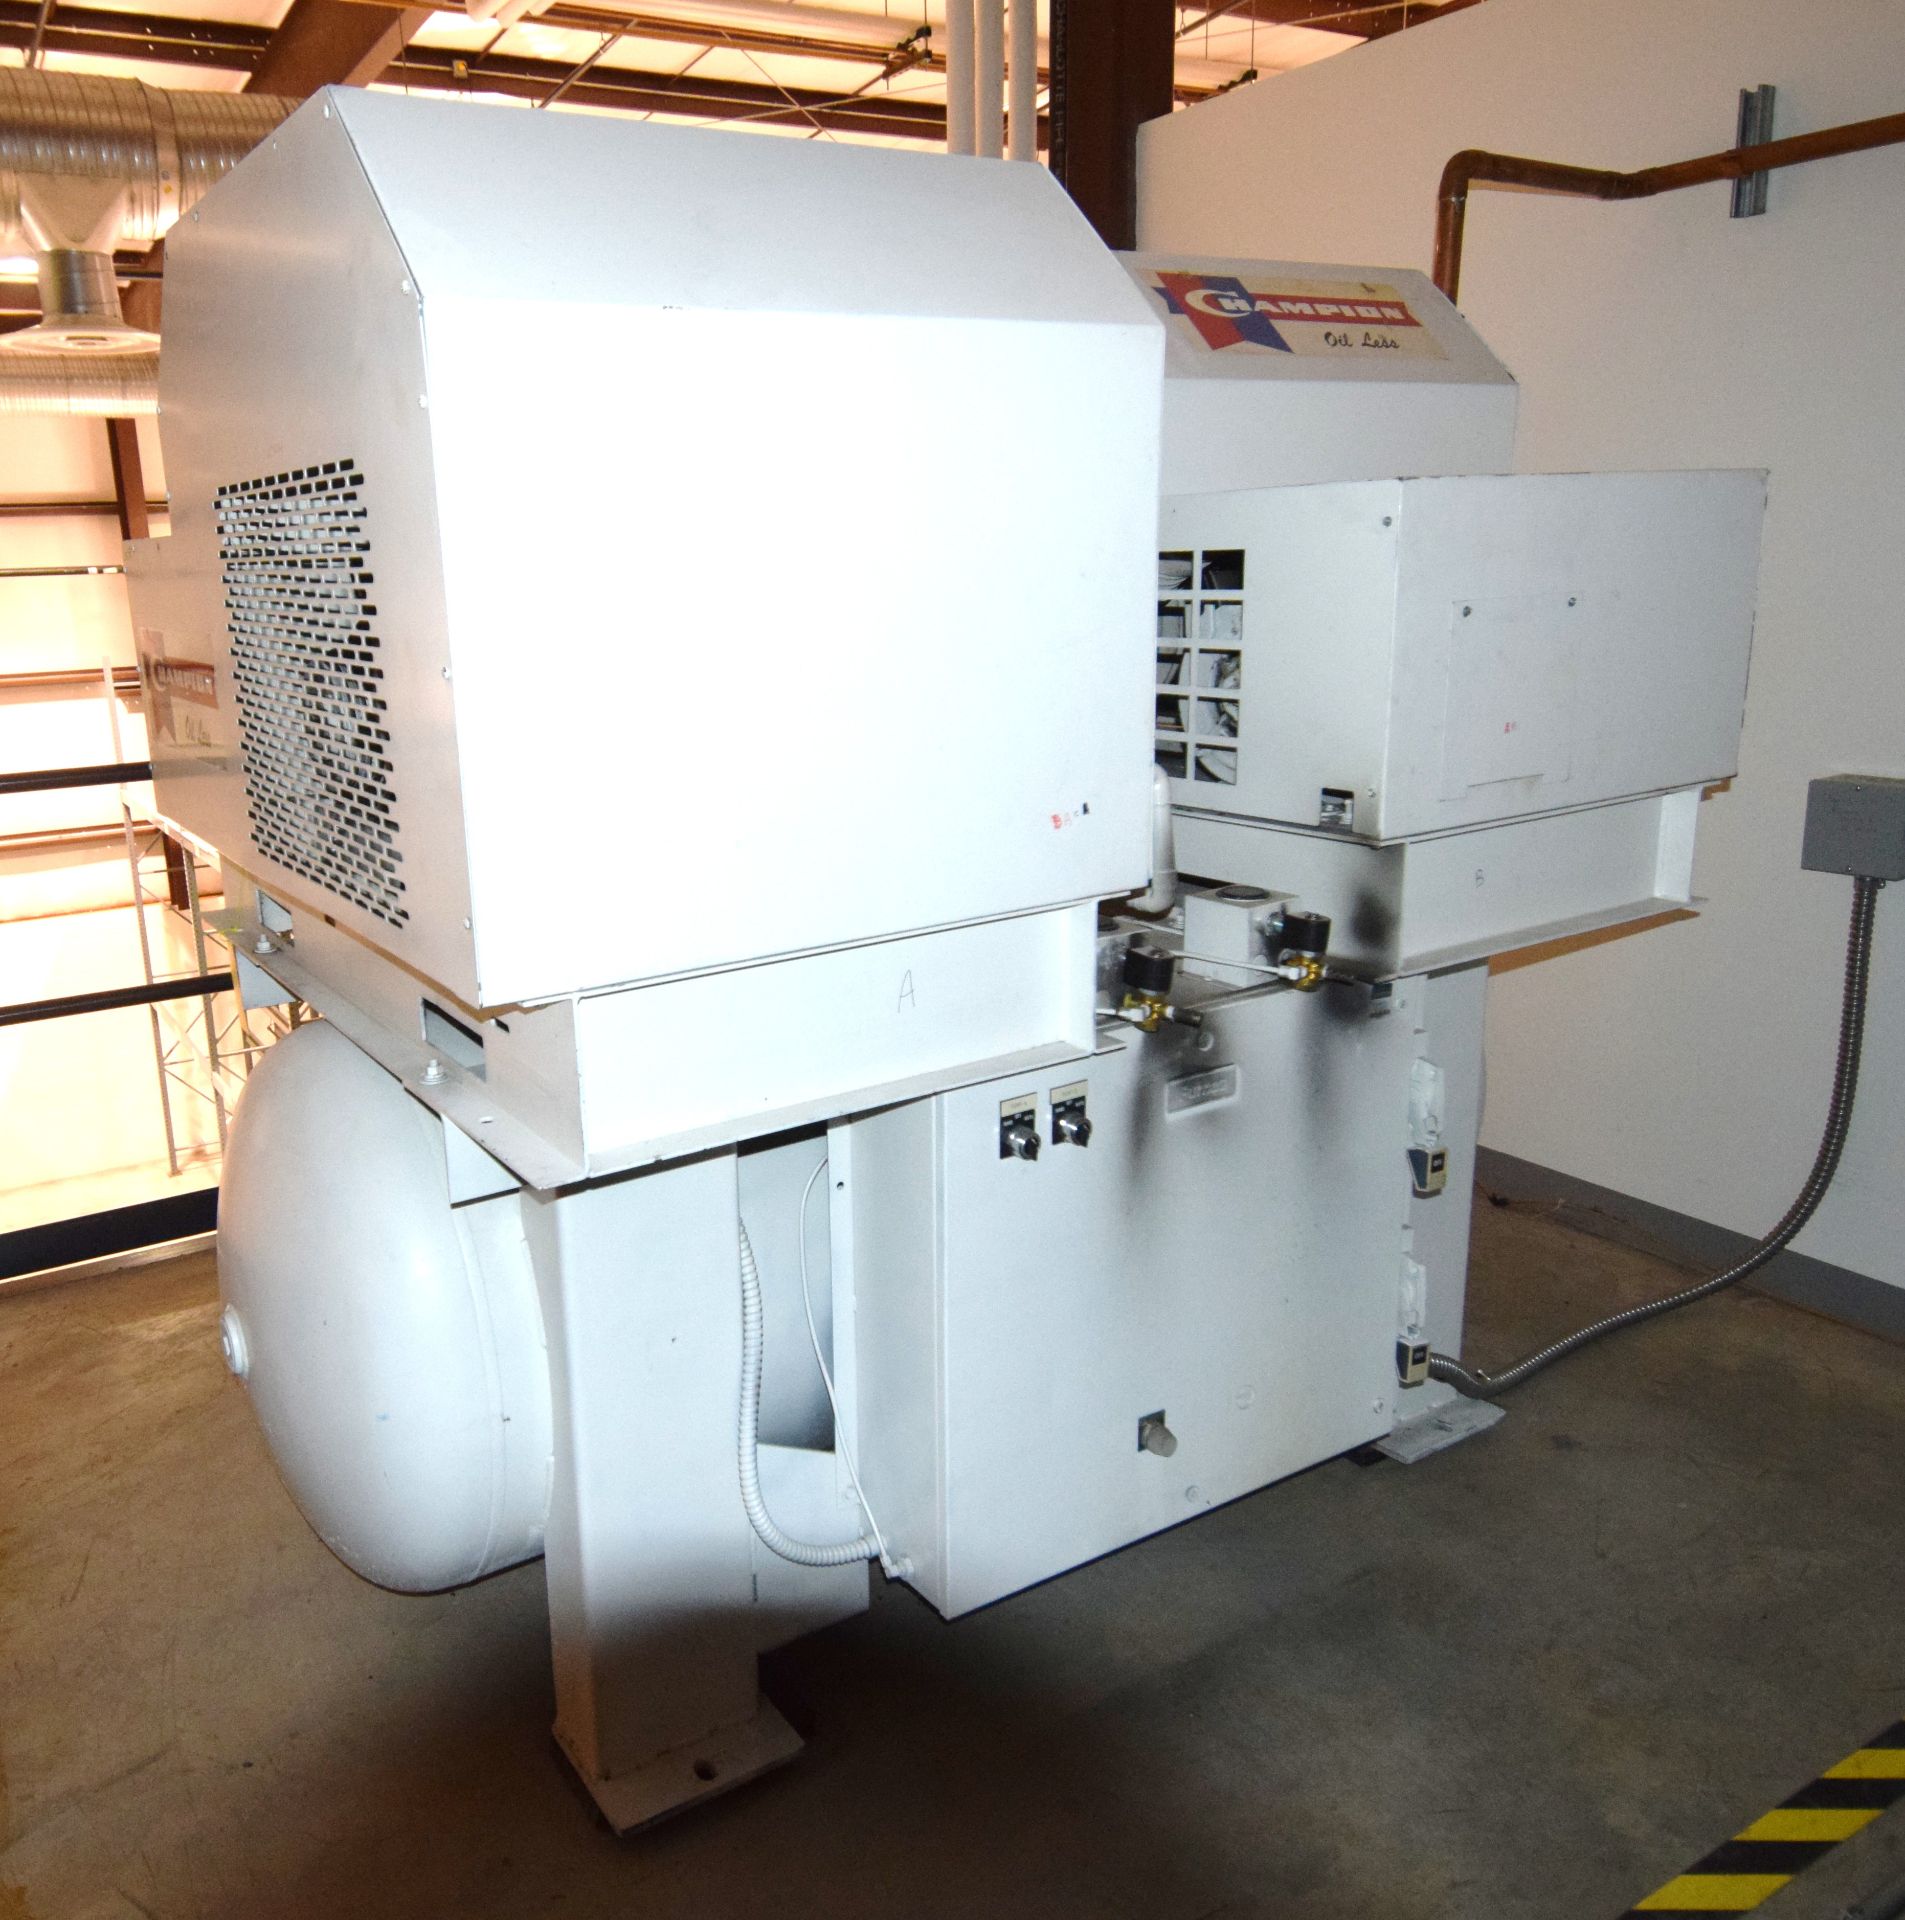 Champion Duplex Oil-Less Reciprocation Air Compressor System. (2) Model 15WTS55A compressors with - Image 2 of 7